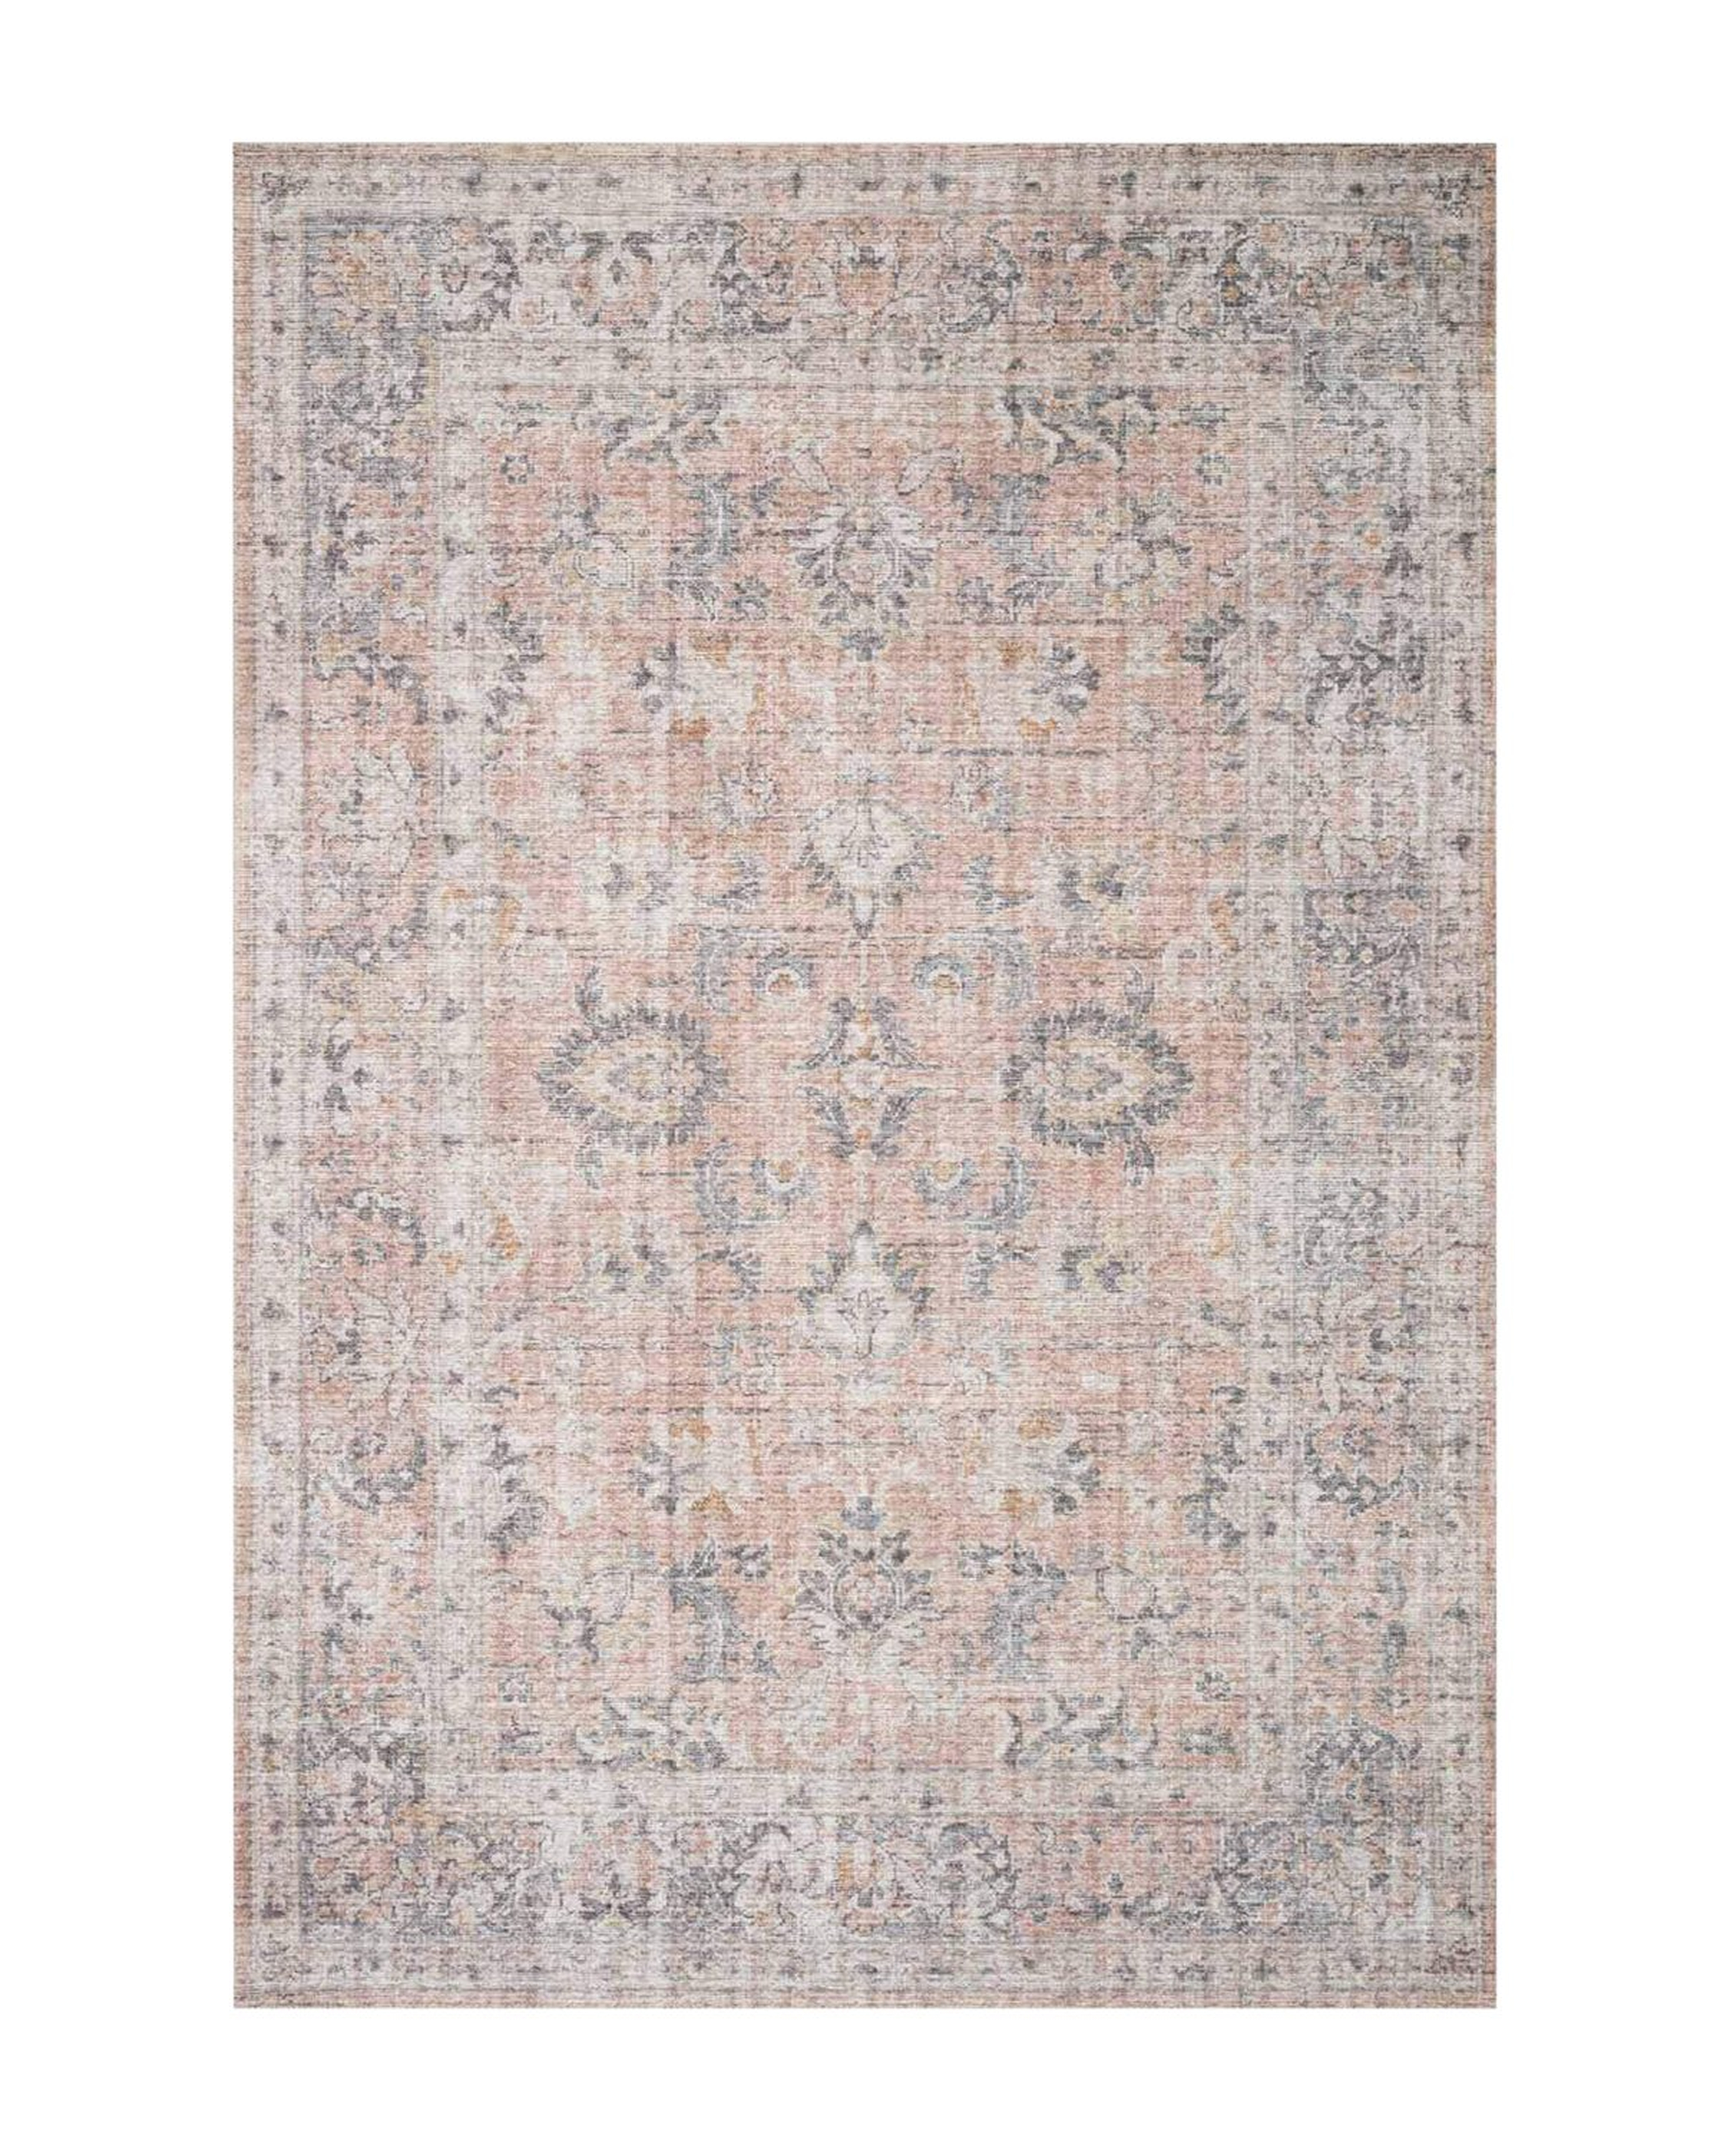 NAPLES BLUSH PATTERNED RUG, 9' x 12' - McGee & Co.